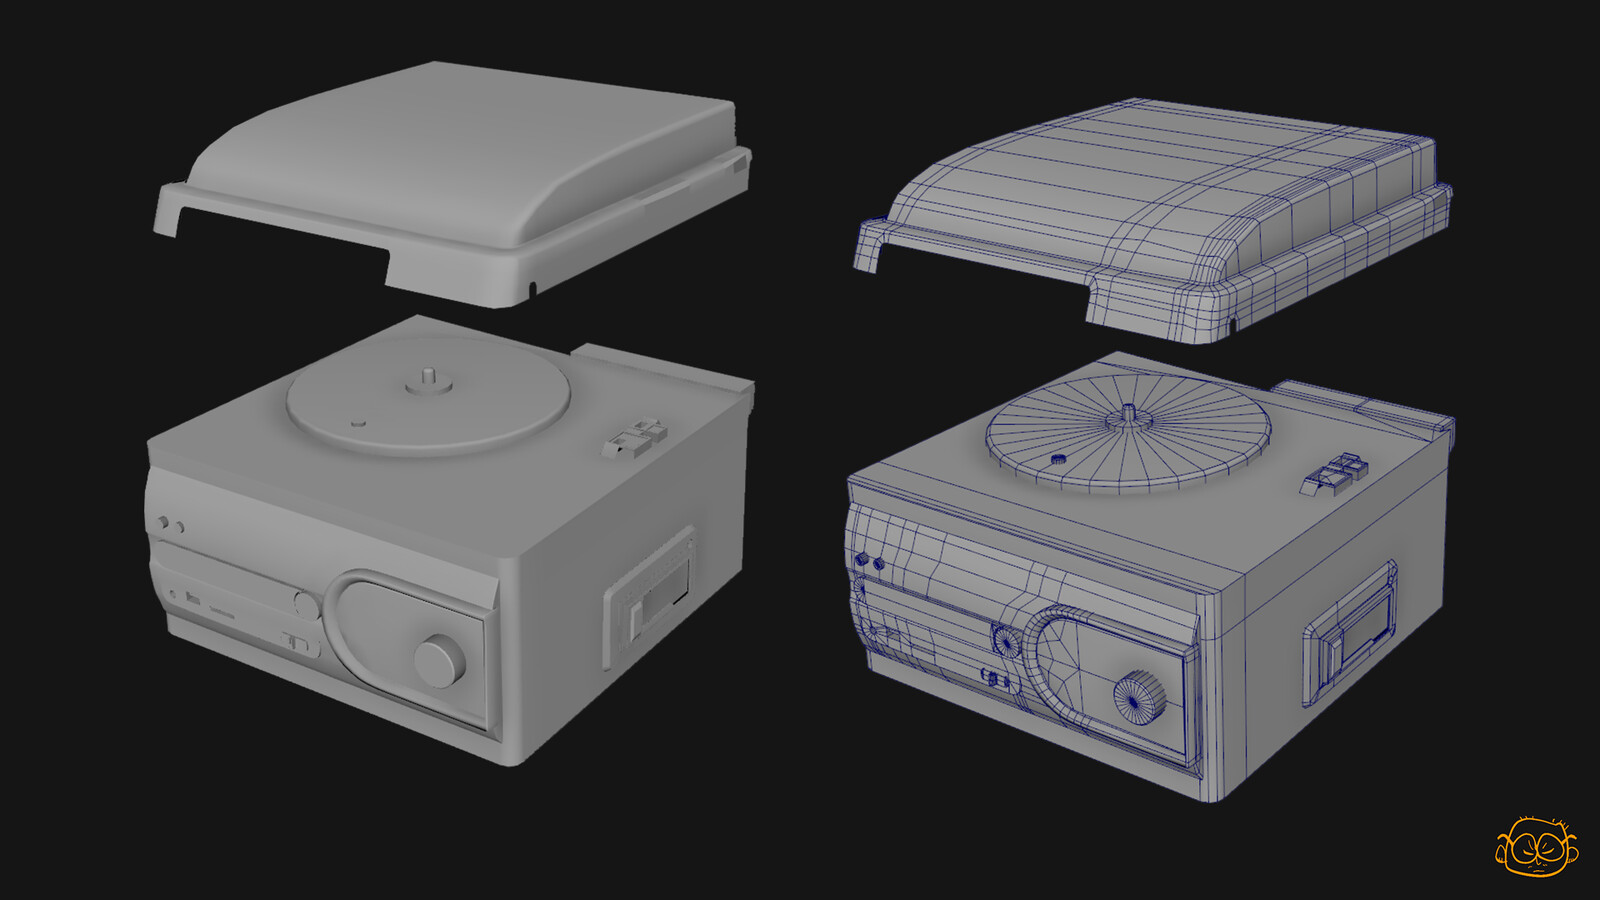 My current main project. A life-SIze digital replica of my own turntable system. 

The lowpoly mesh, still a work in progress. No proper optimization yet, but pleased with the shapes thus far.
